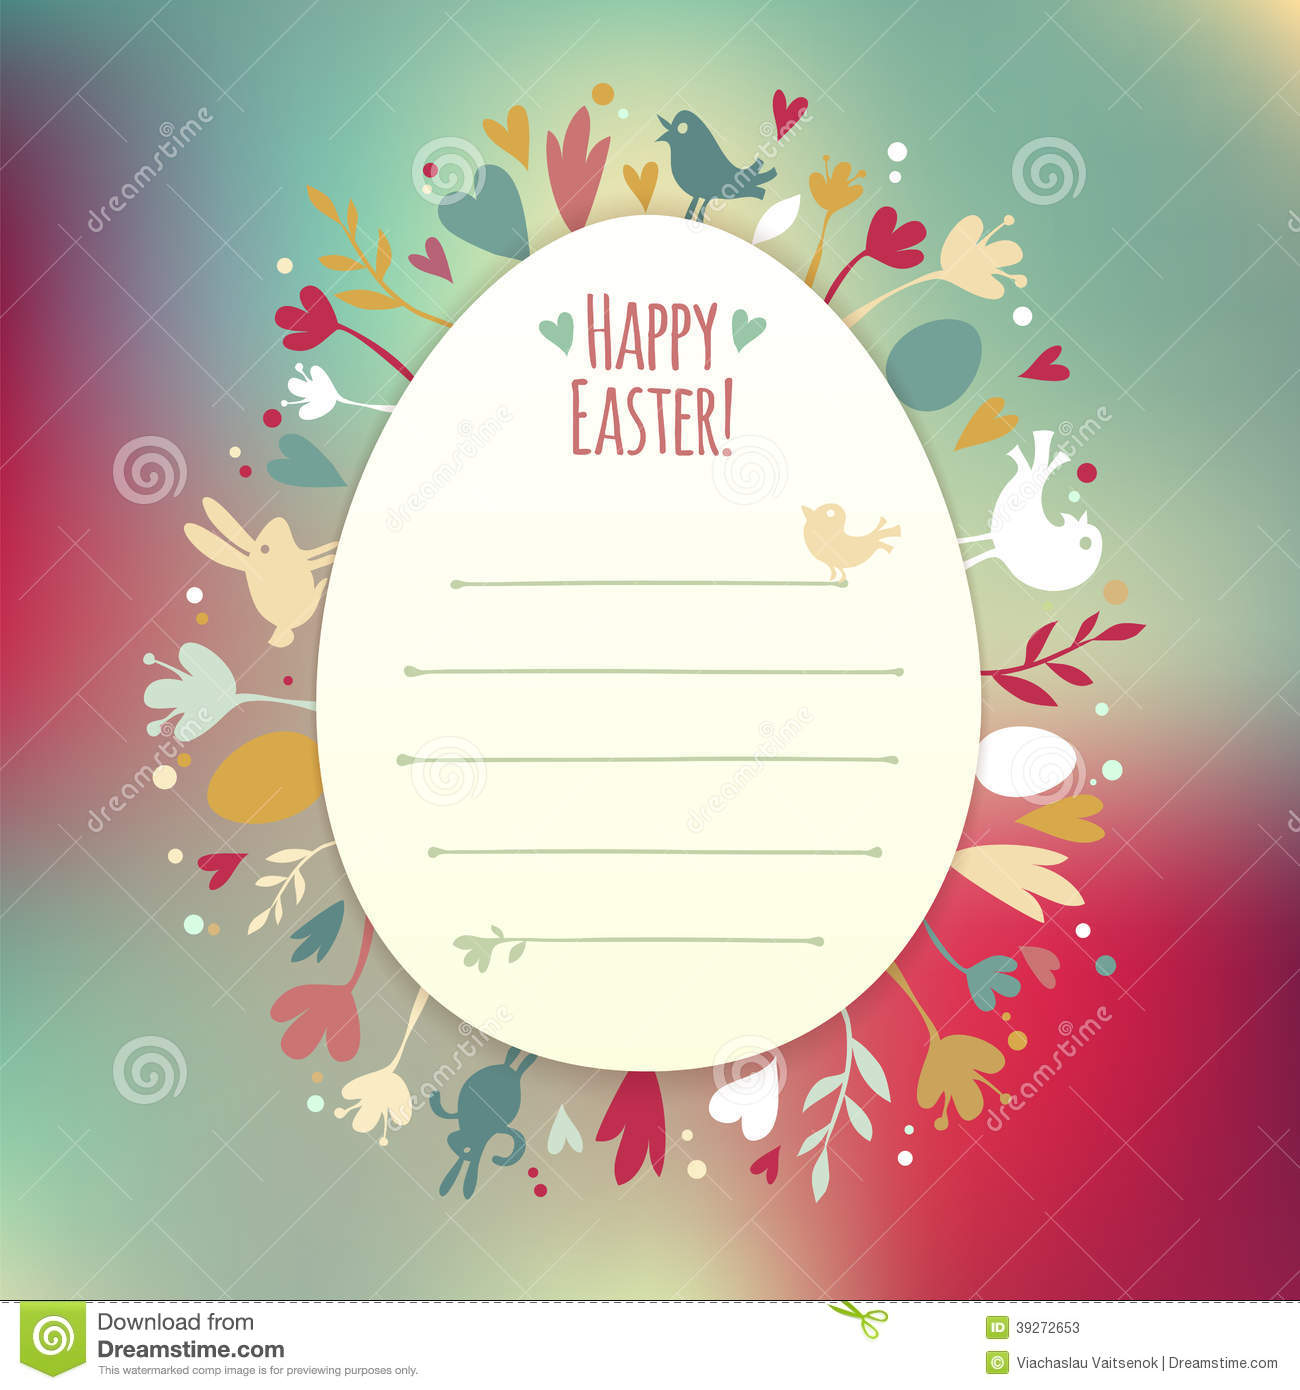 Easter Card With Symbols Of Spring On Retro Background  In The Eps